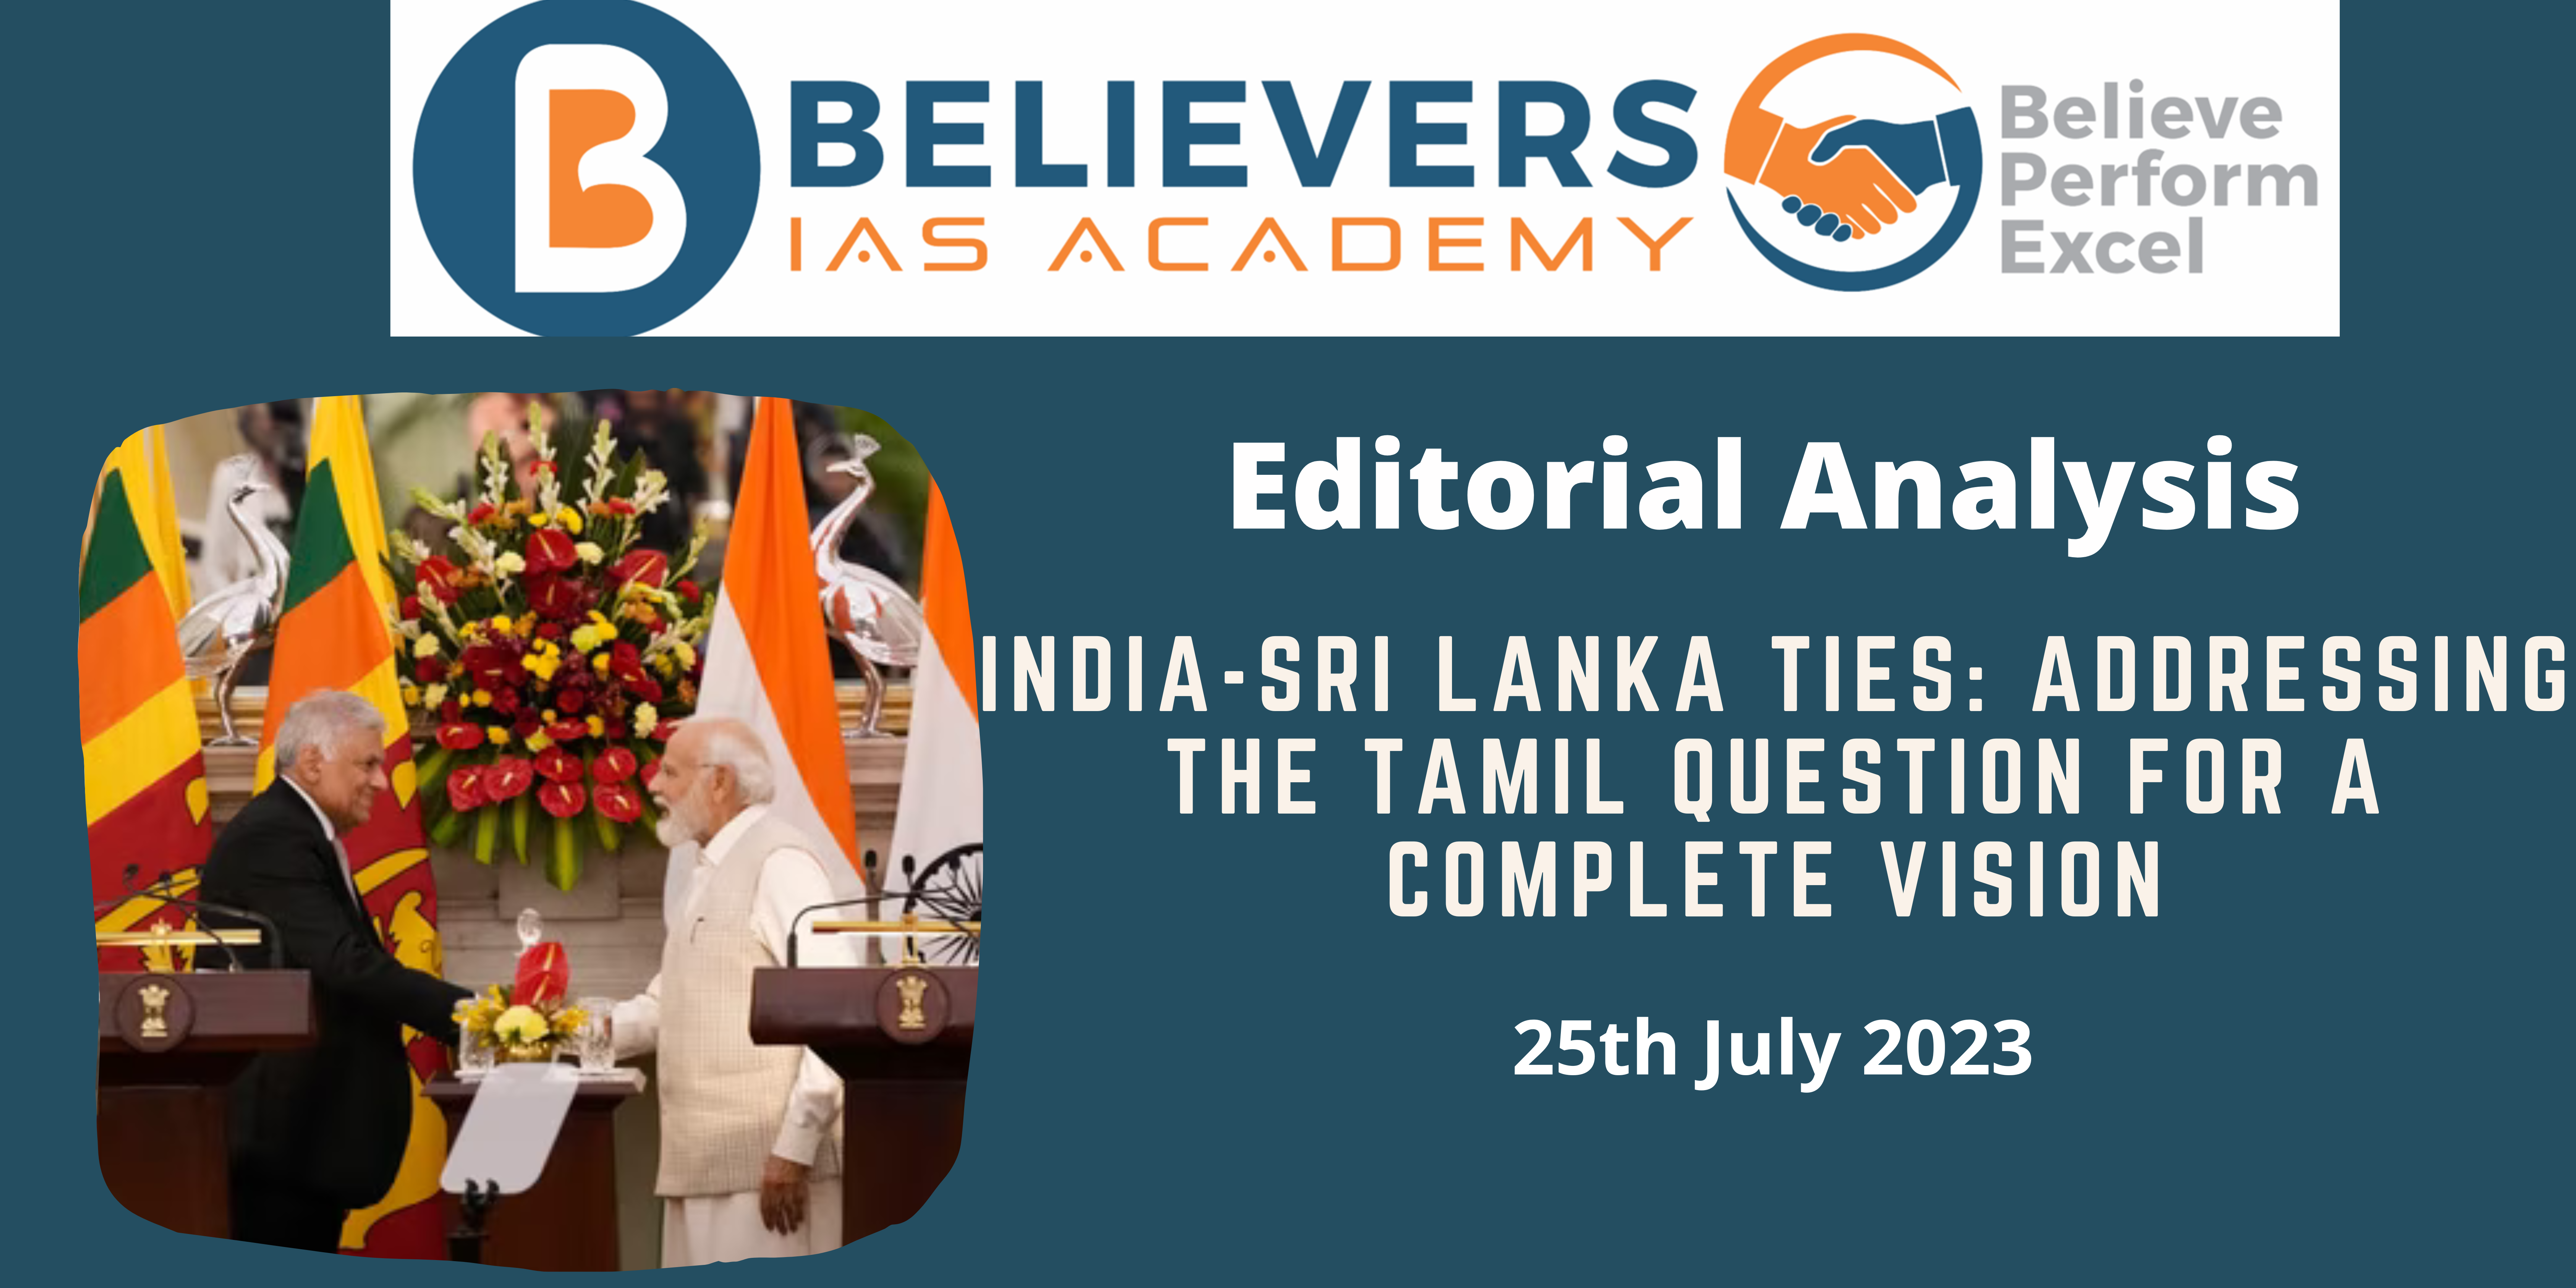 India-Sri Lanka Ties: Addressing the Tamil Question for a Complete Vision